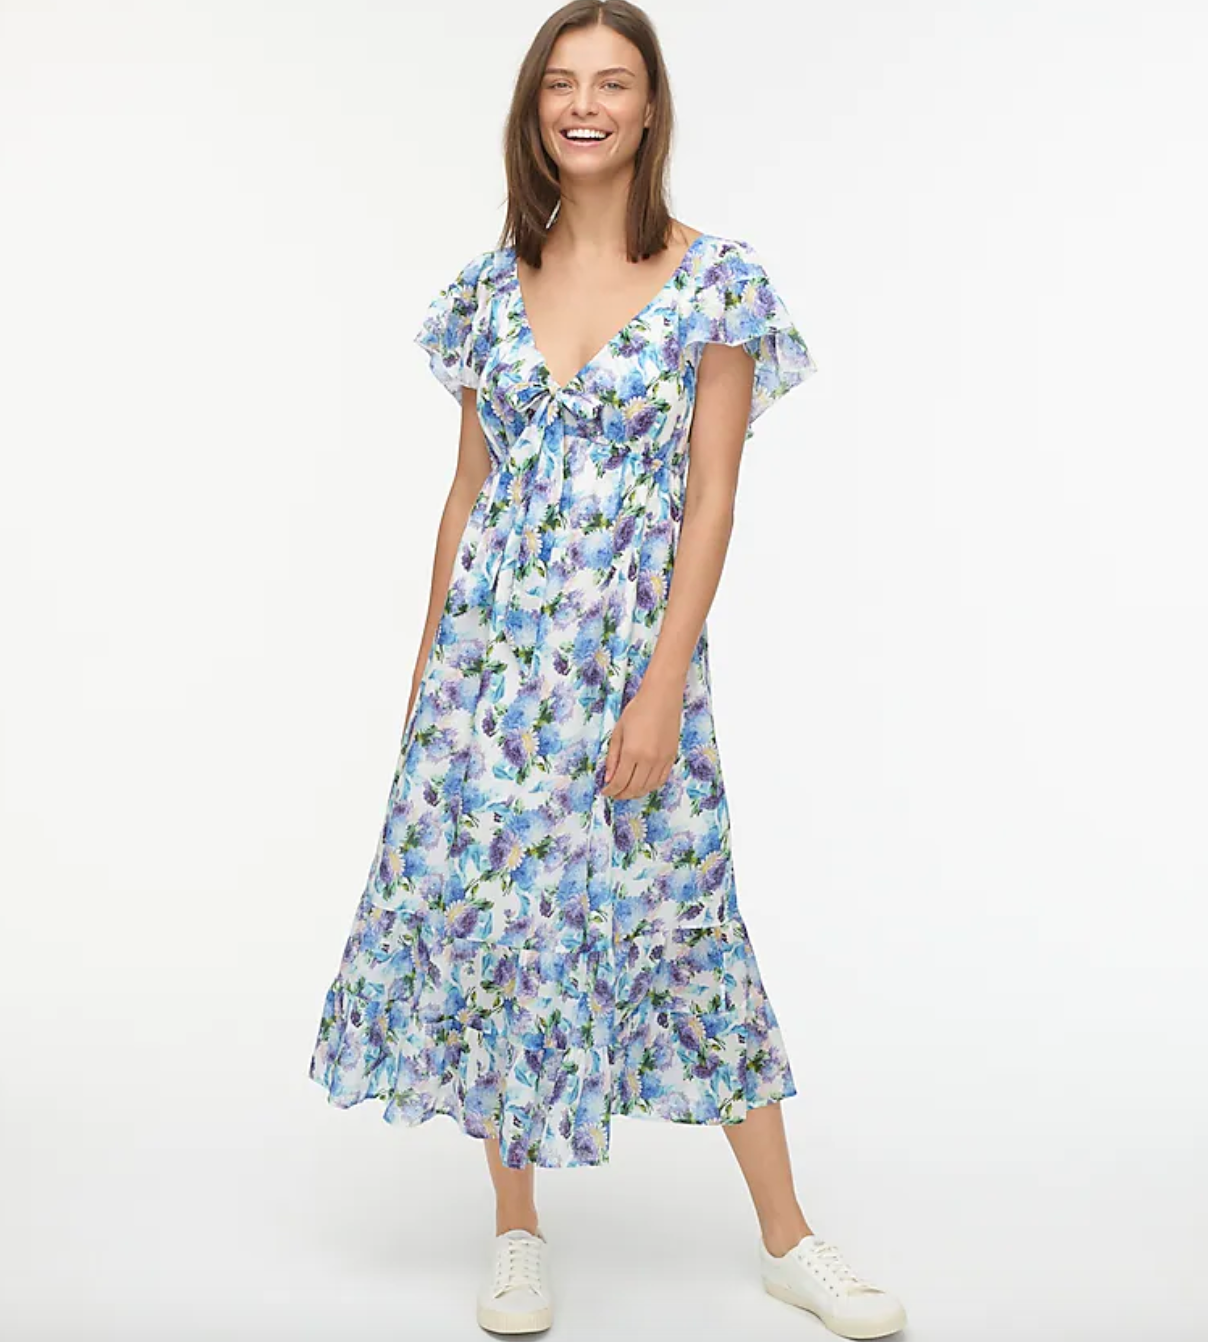 24 Floral Dresses That Are Cute And Comfortable